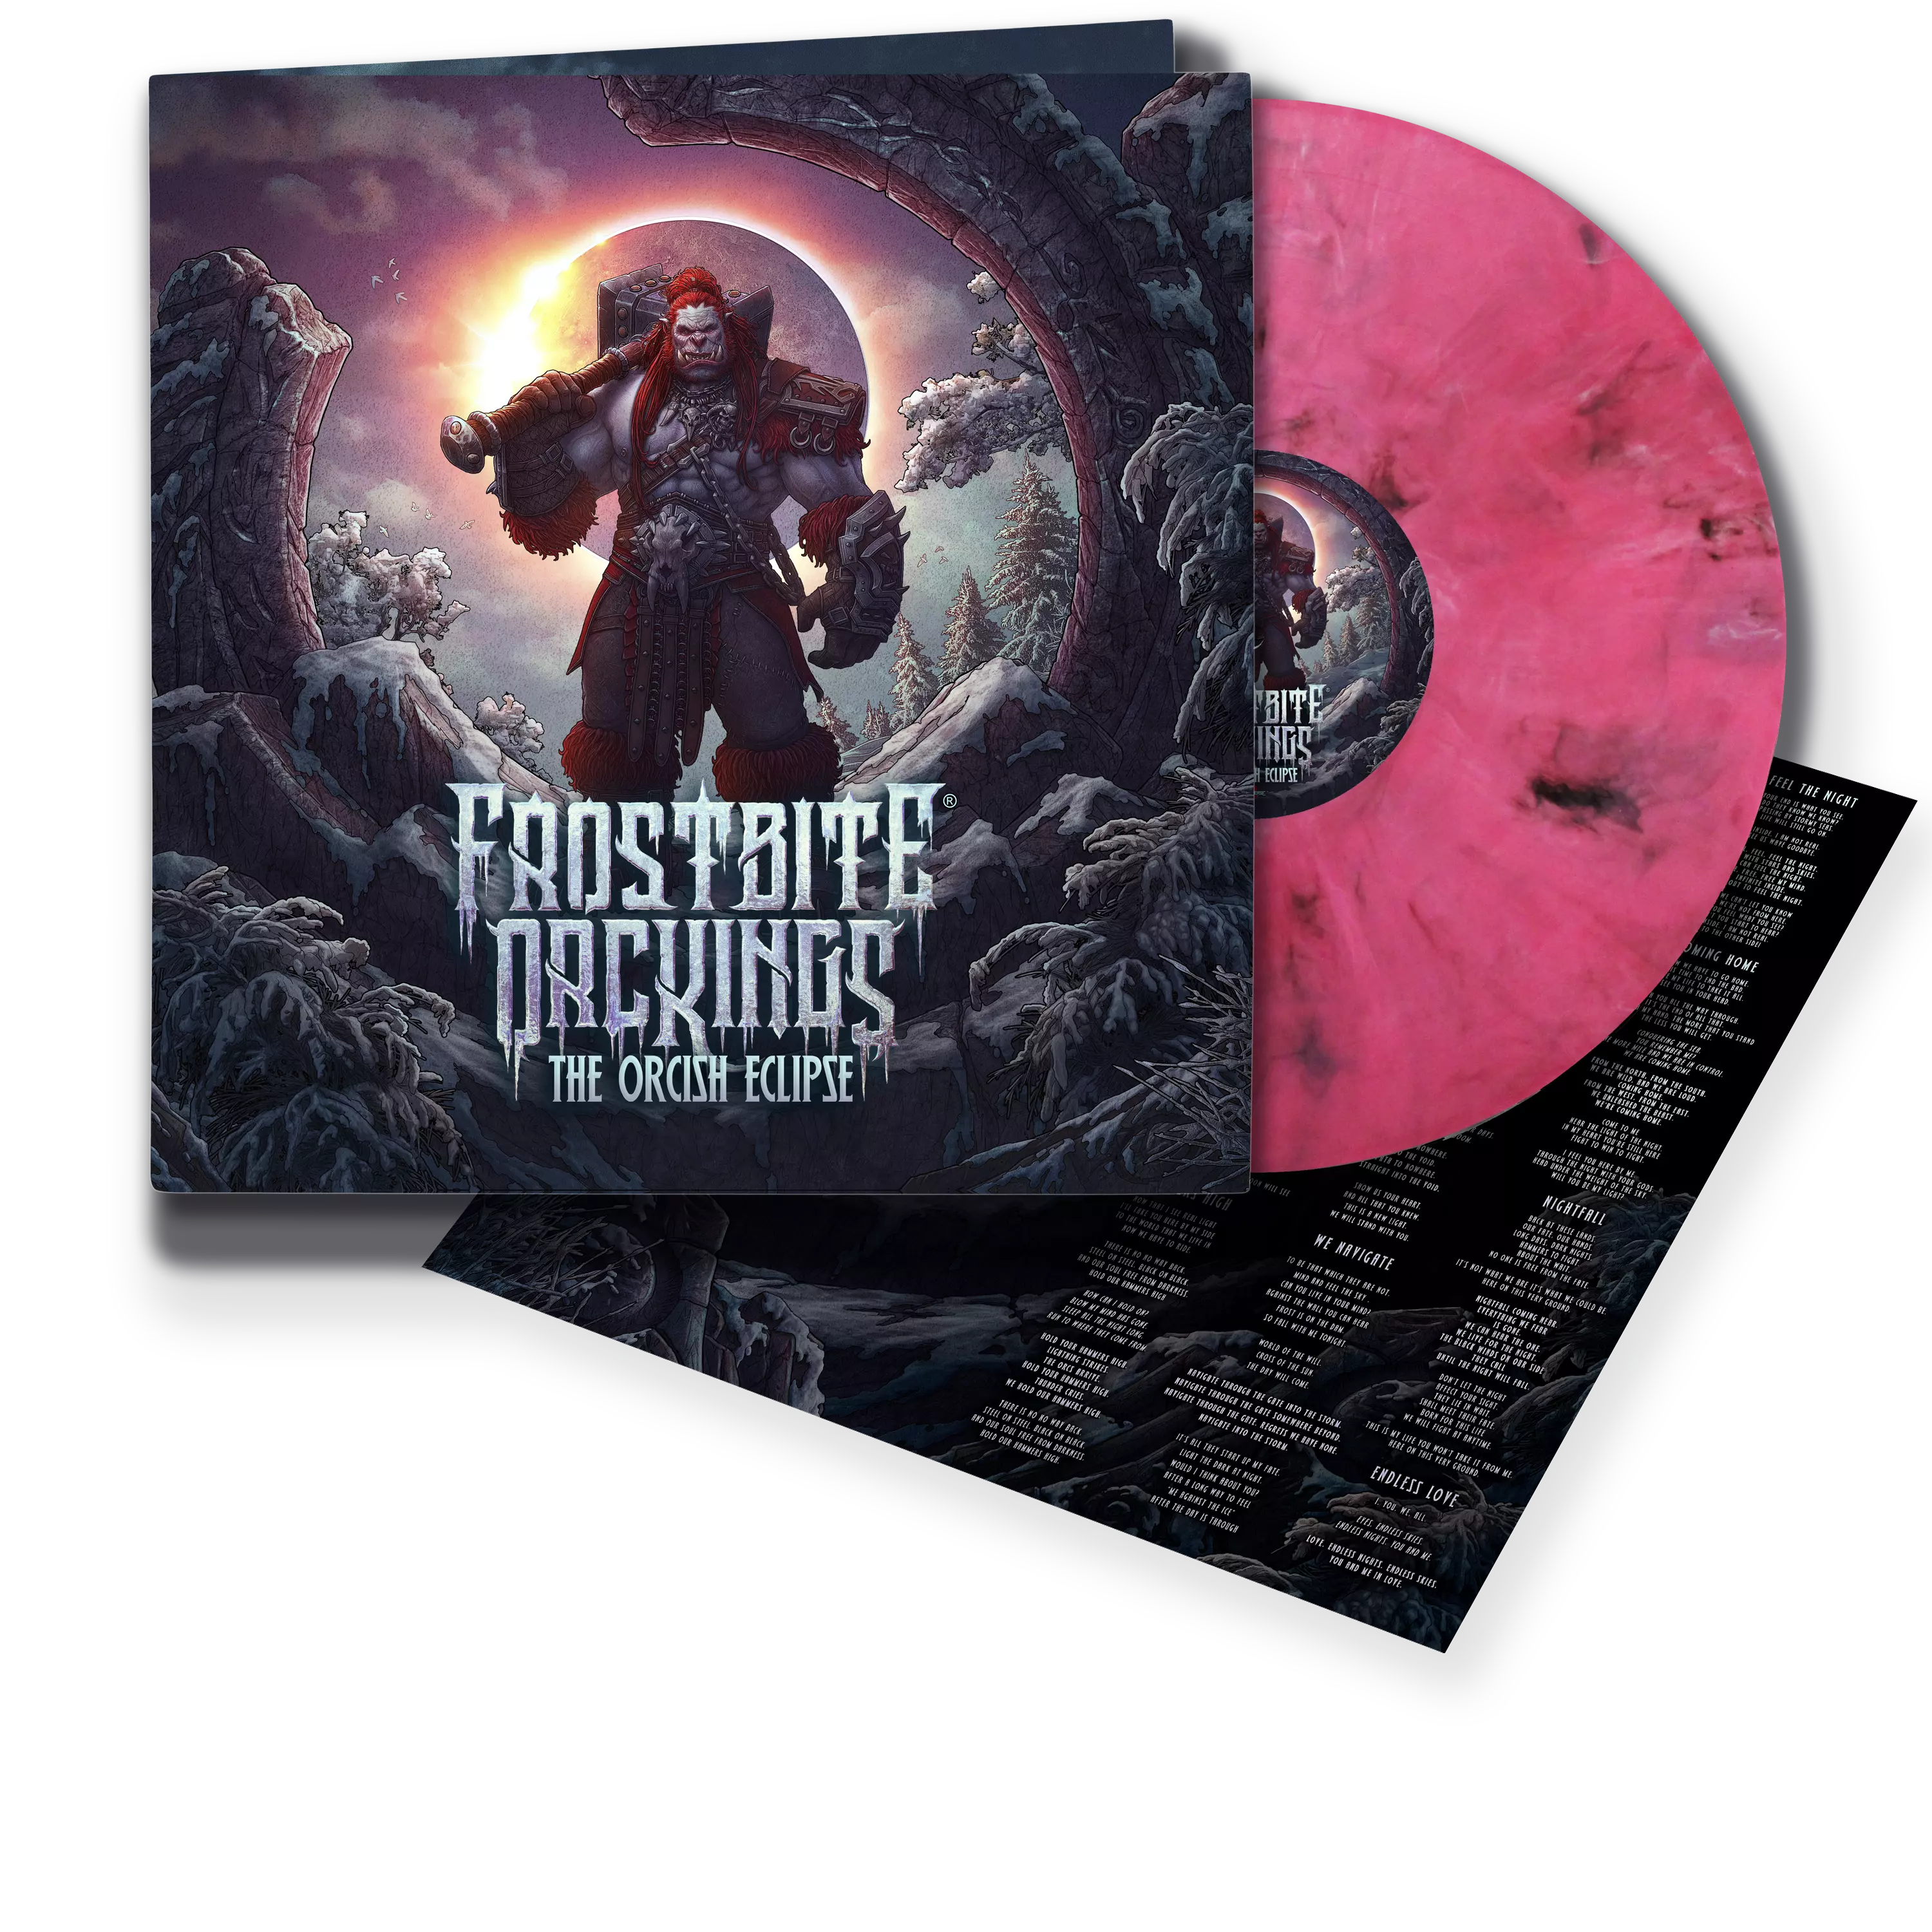 FROSTBITE ORCKINGS - The Orcish Eclipse [ECLIPSE PINK VINYL LP]